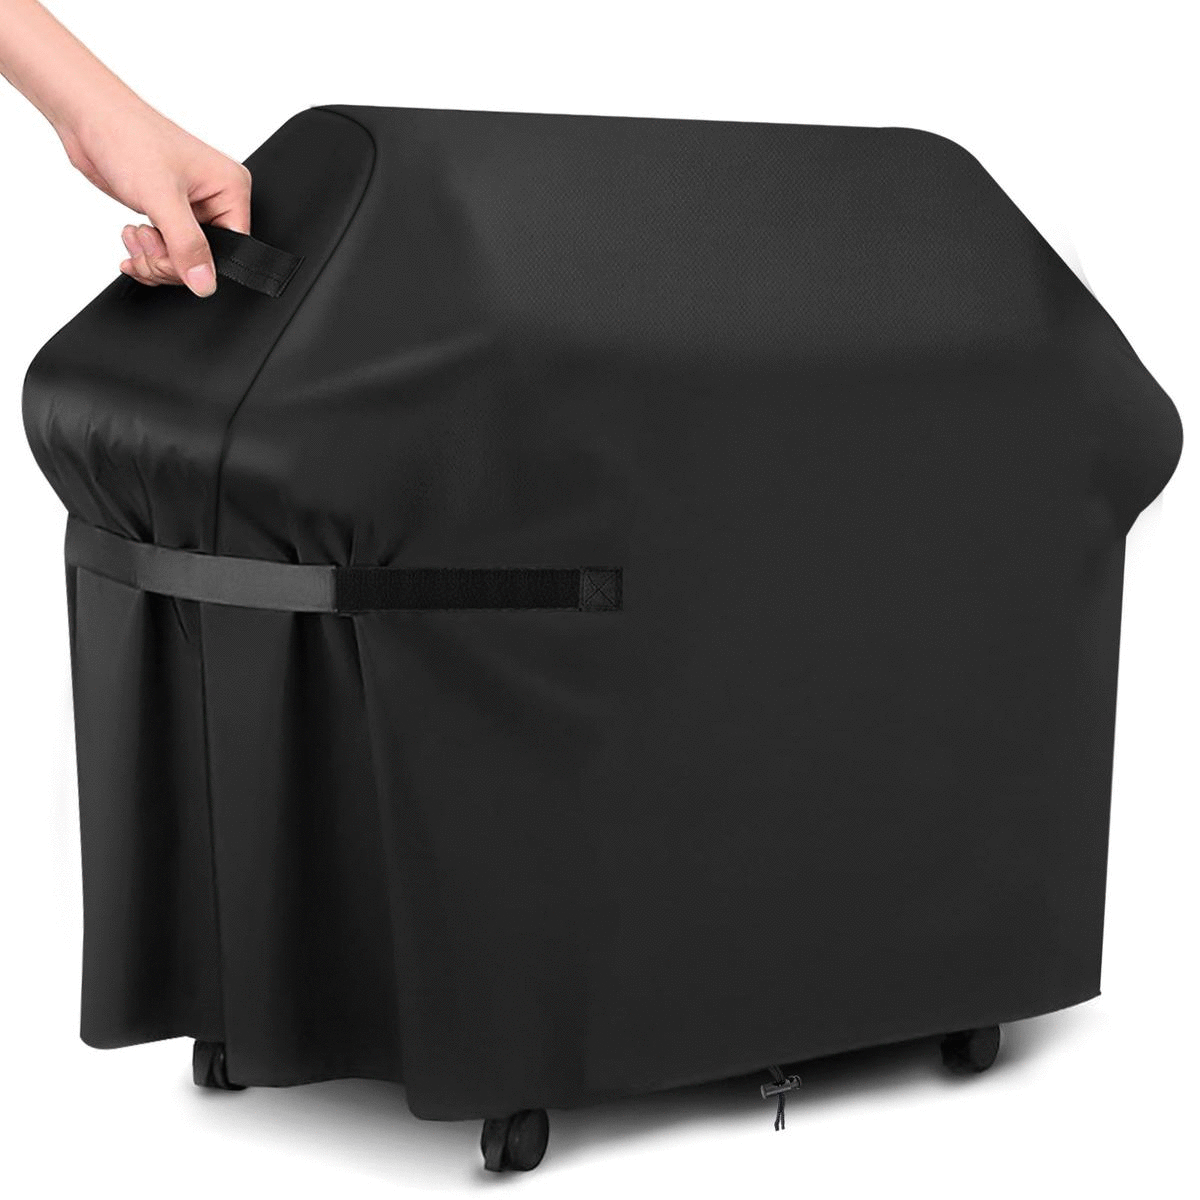 Waterproof Heavy Duty Gas 58-Inch BBQ Grill Cover Barbecue Char Broil NEW UK 